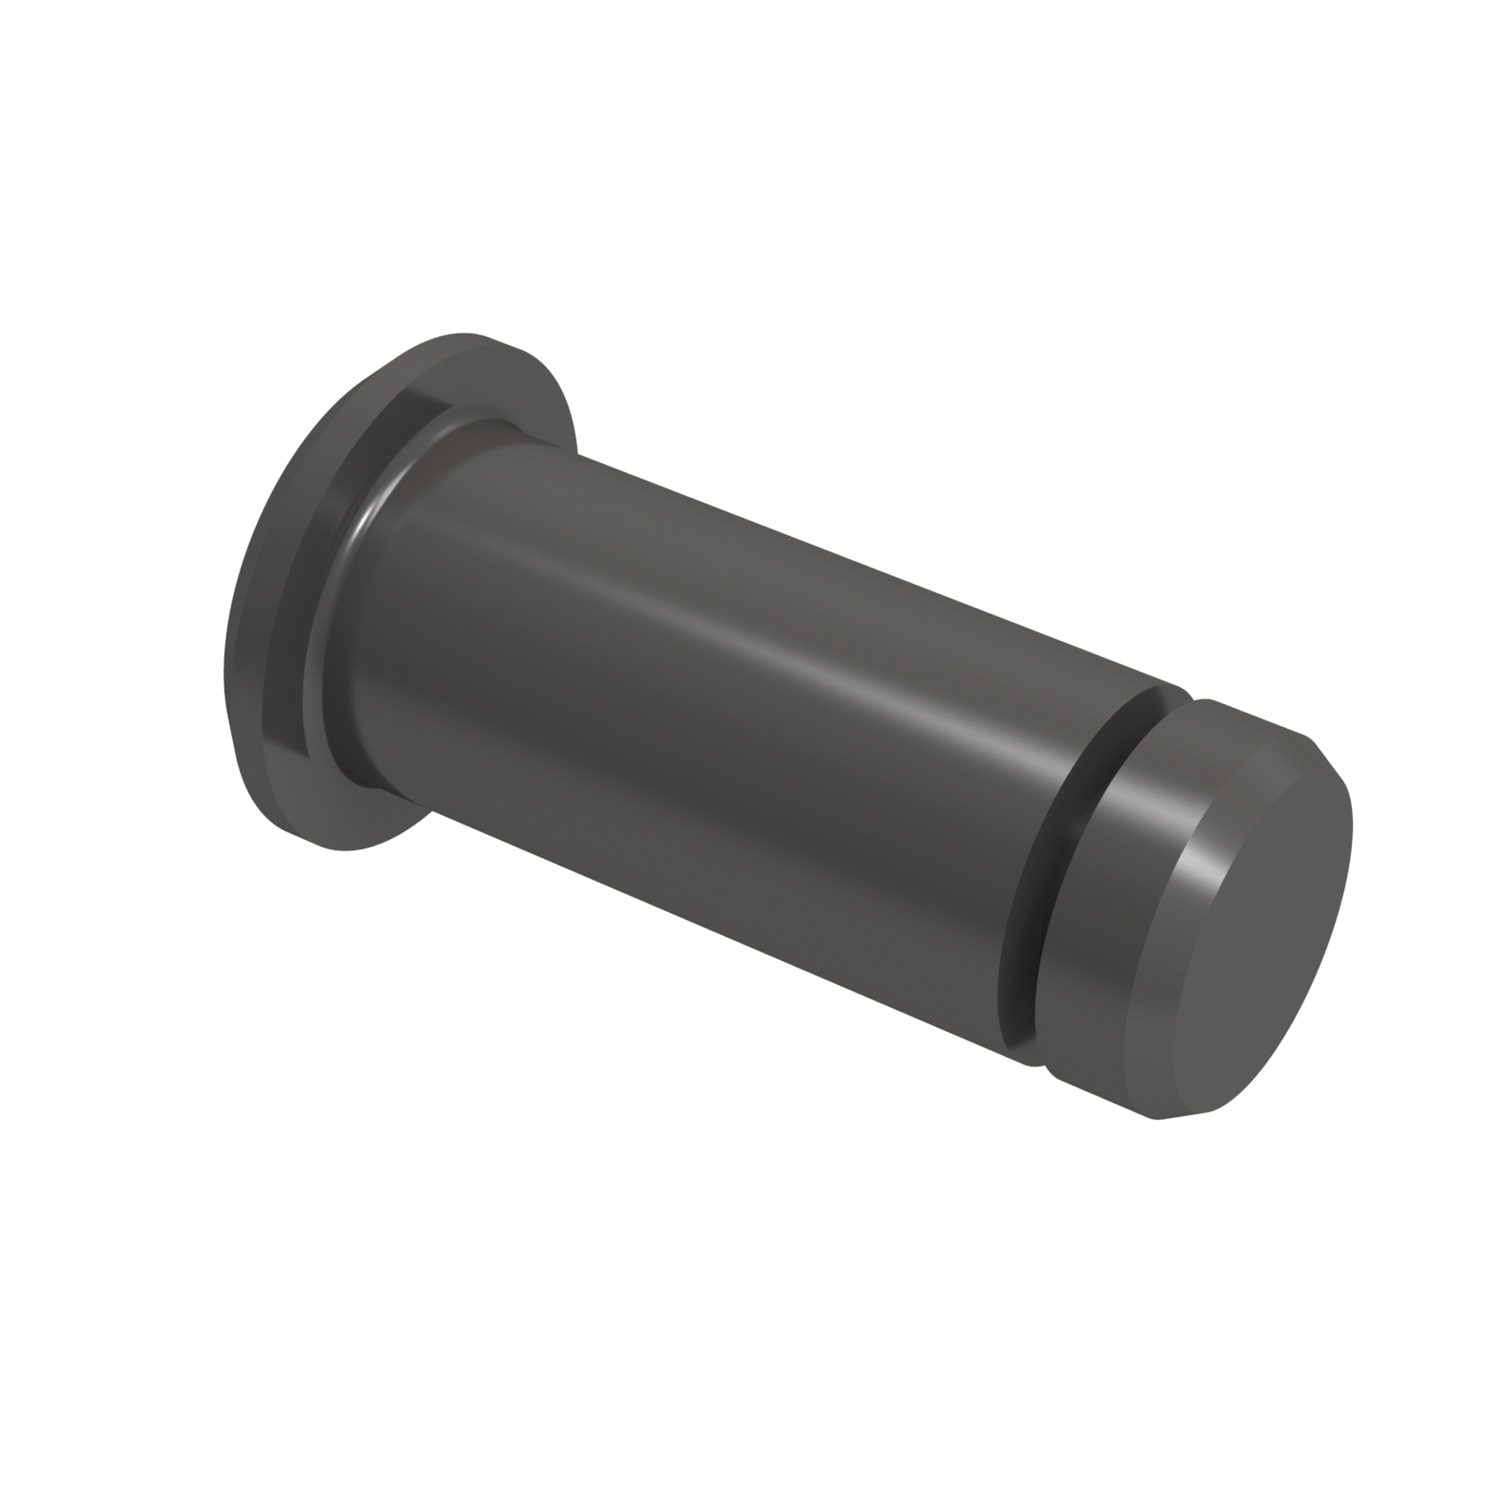 Plastic Clevis Pin Plastic clevis pin available from stock. For use with R3409 (clevis joints) and R3446 (circlips).